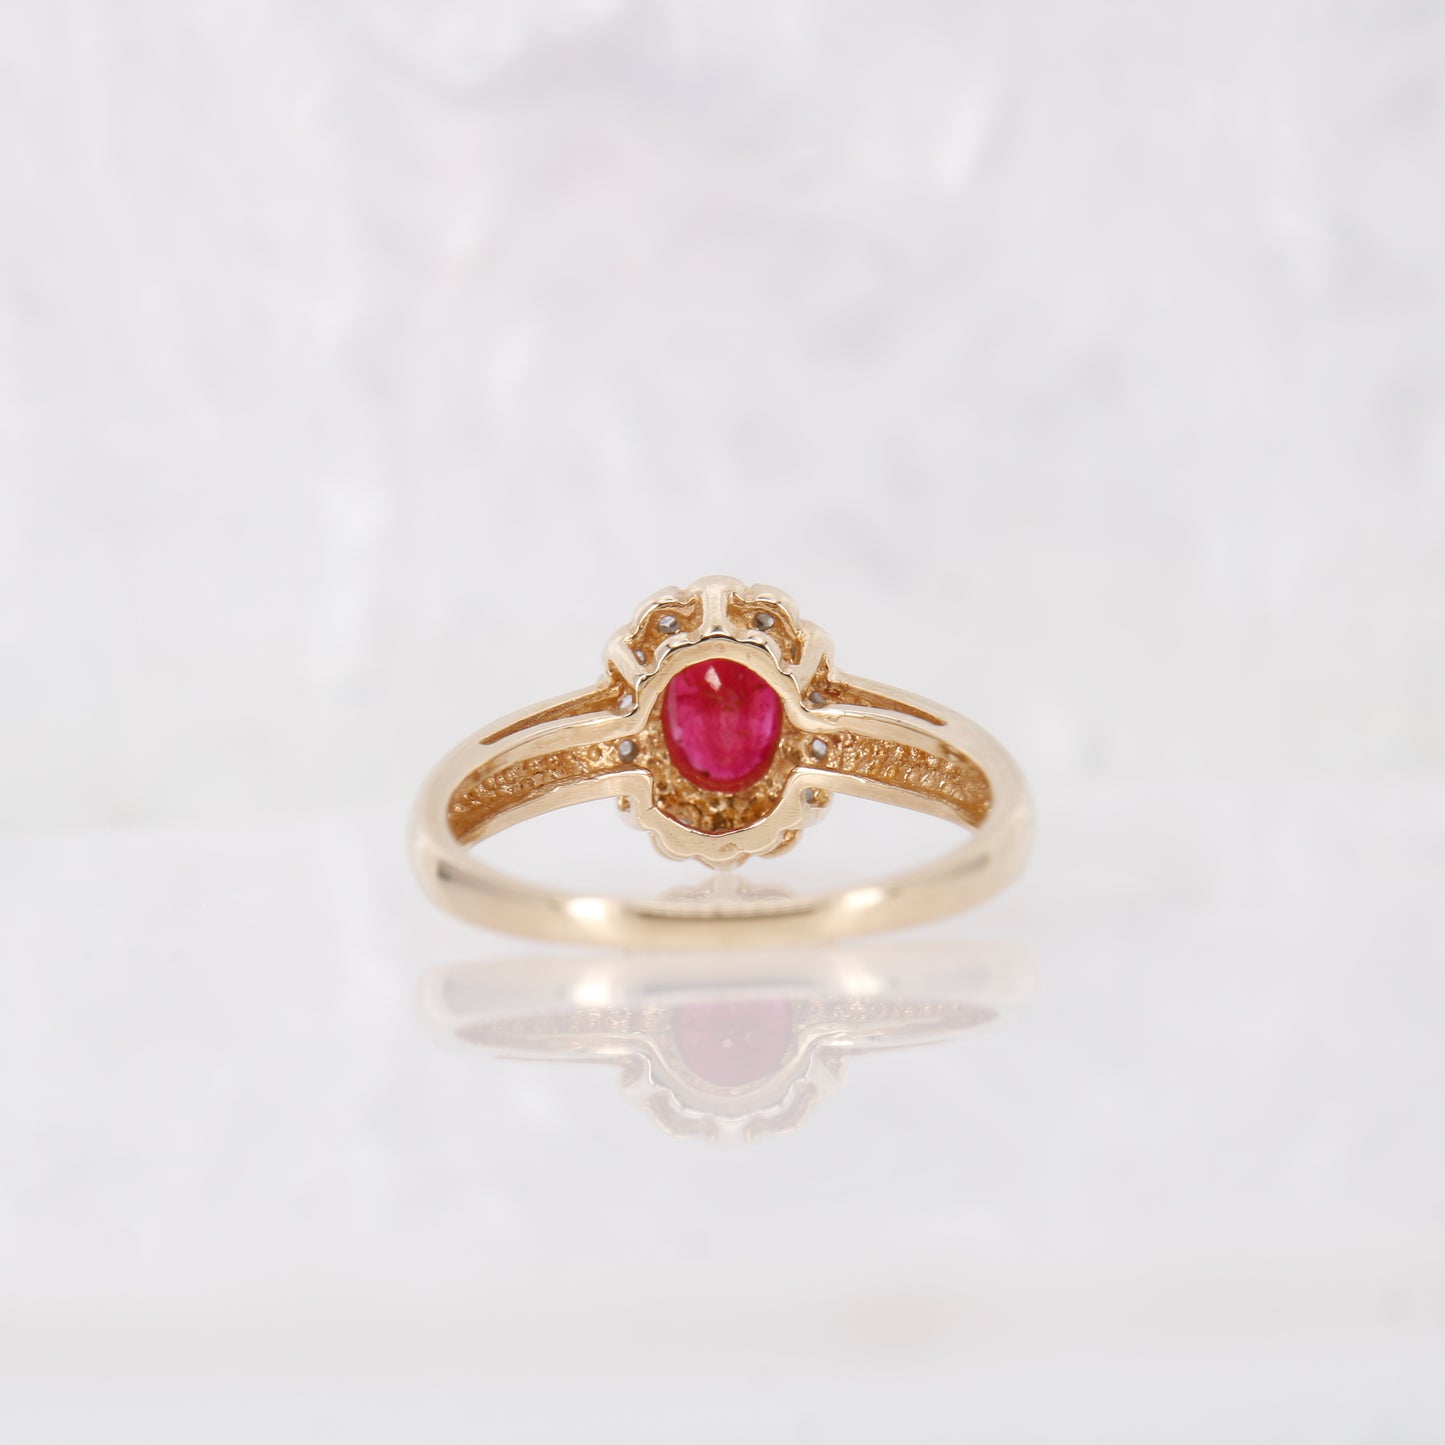 Secondhand Vintage Garnet and Ring. Halo cut Garnet with a halo of diamonds, set in 9ct gold.